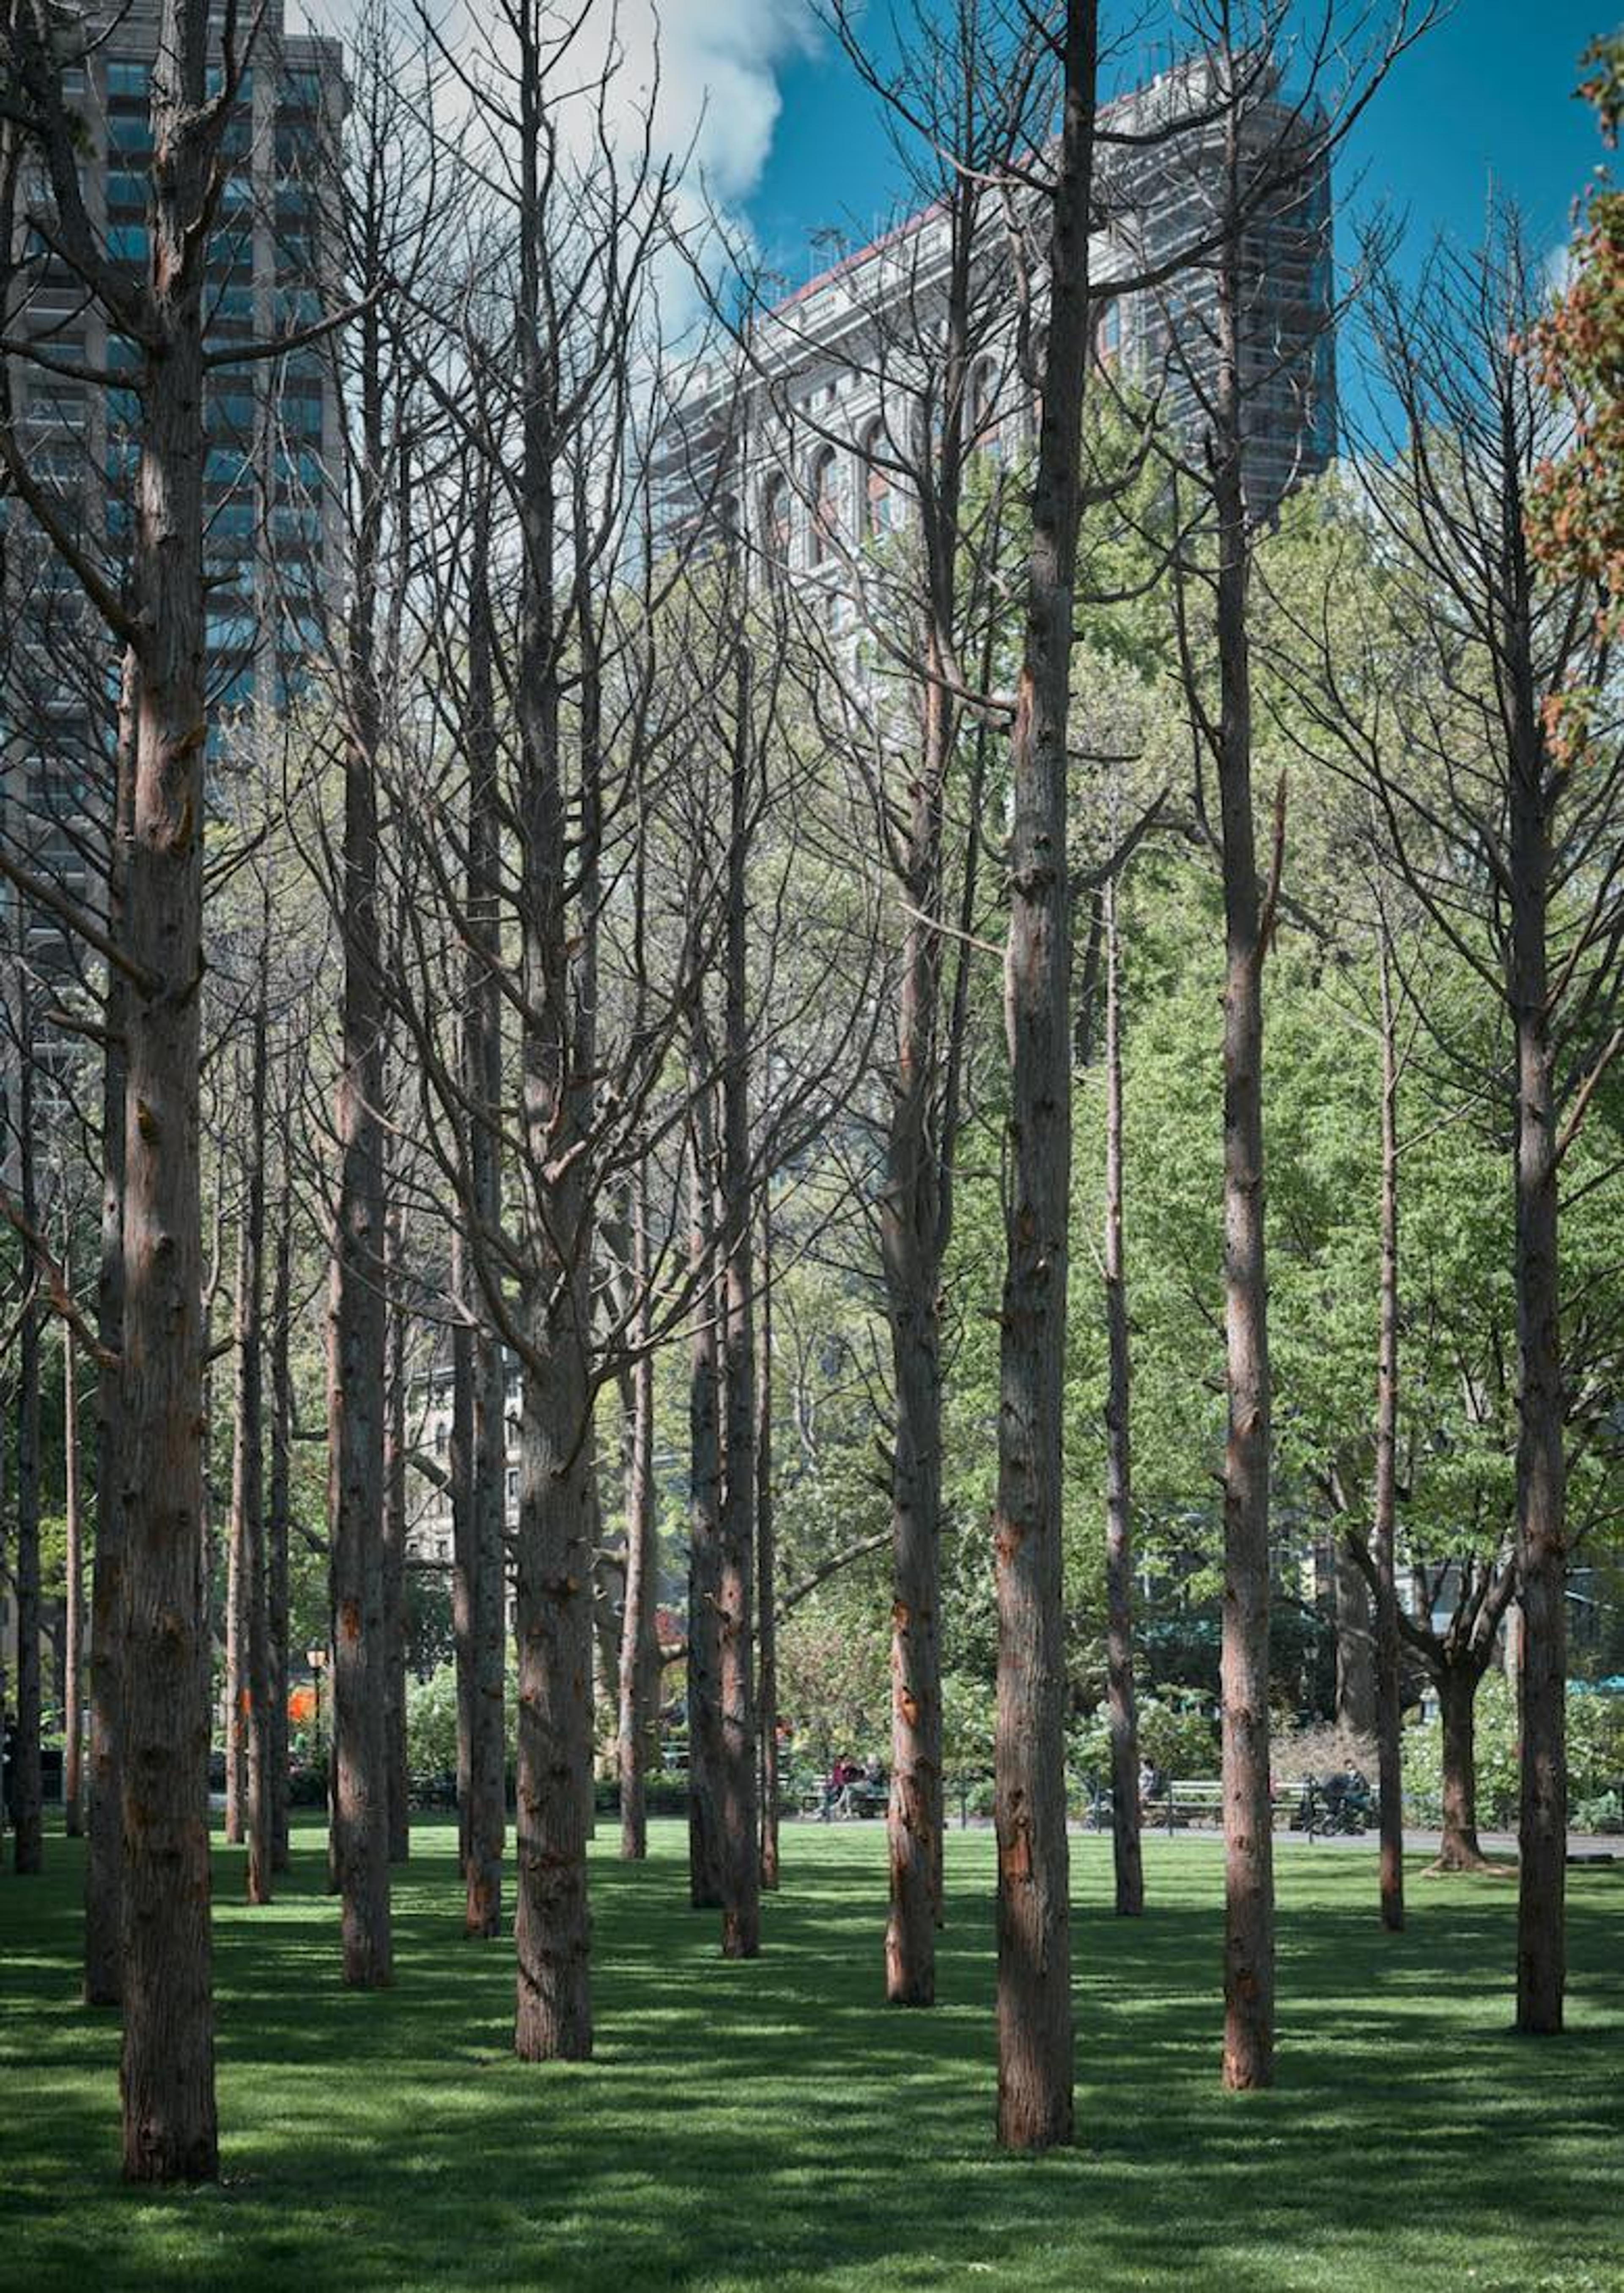 A photograph of a well-manicured group of trees, with an urban setting in the distant background